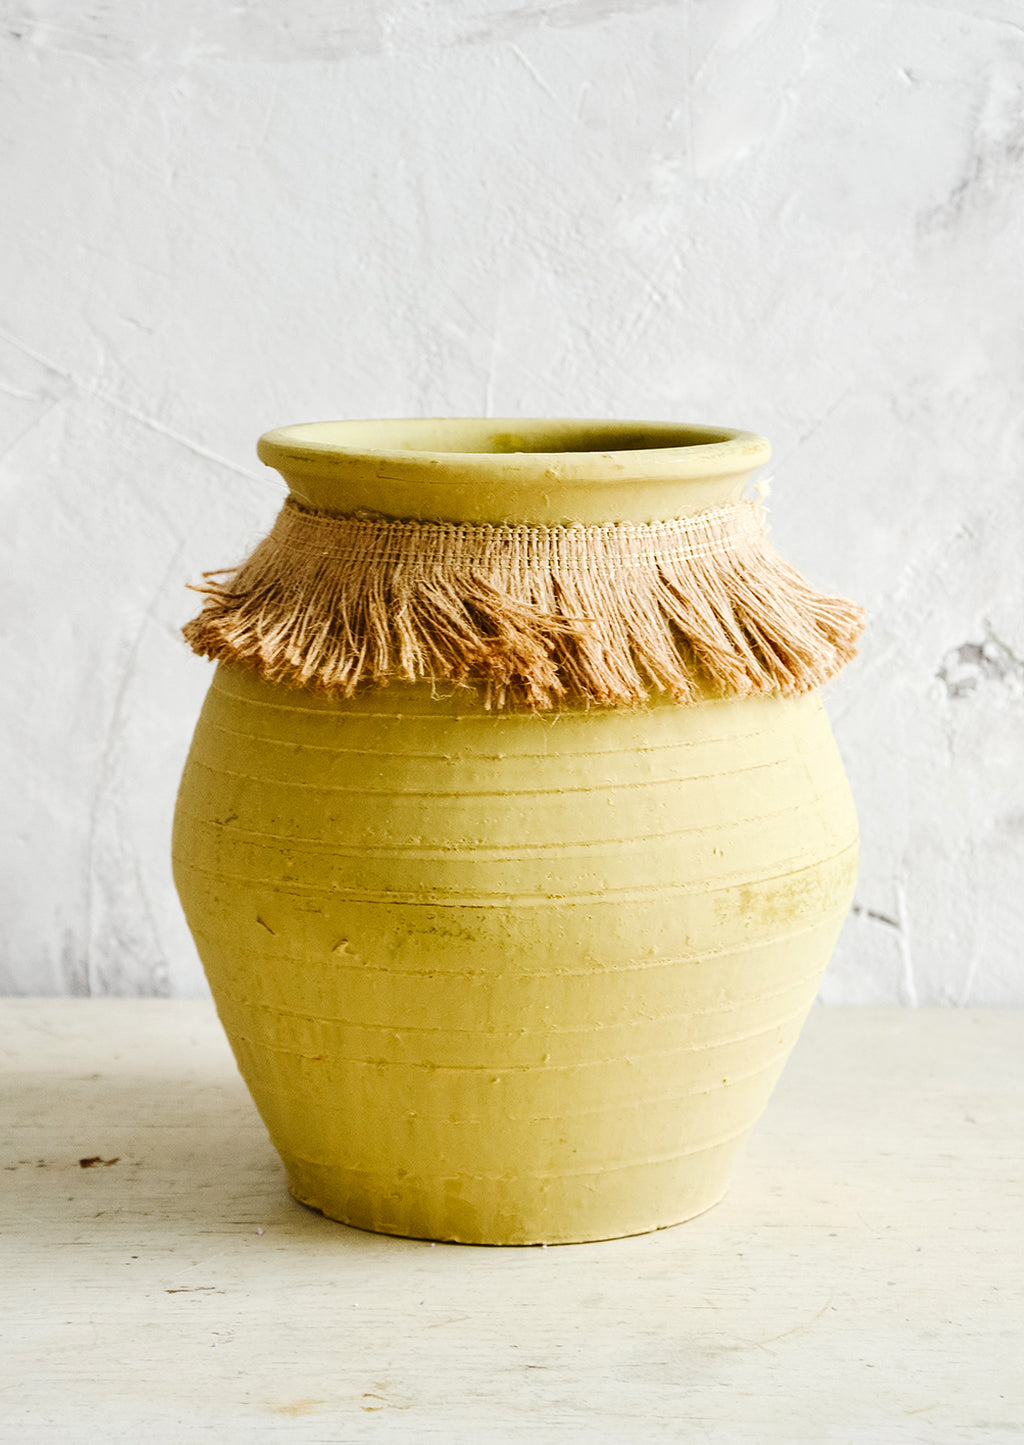 Large: Tall, ochre colored clay vase with fringed jute trim around opening